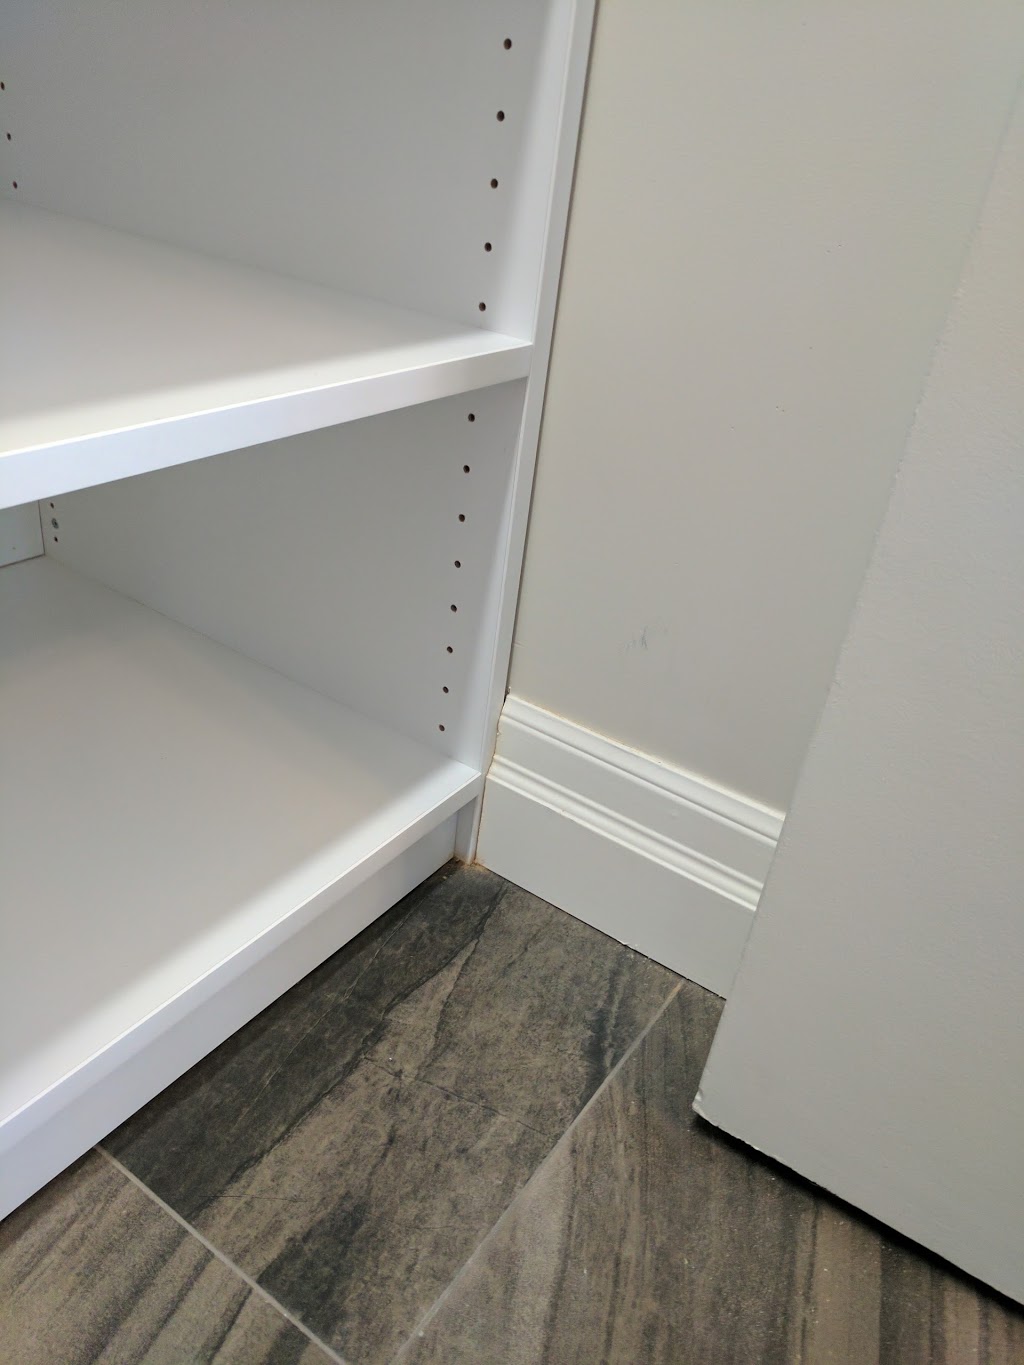 Closets by Design - Montreal | furniture store | 4747 Rue Bourg, Saint-Laurent, QC H4T 1H9, Canada | 5146316777 OR +1 514-631-6777